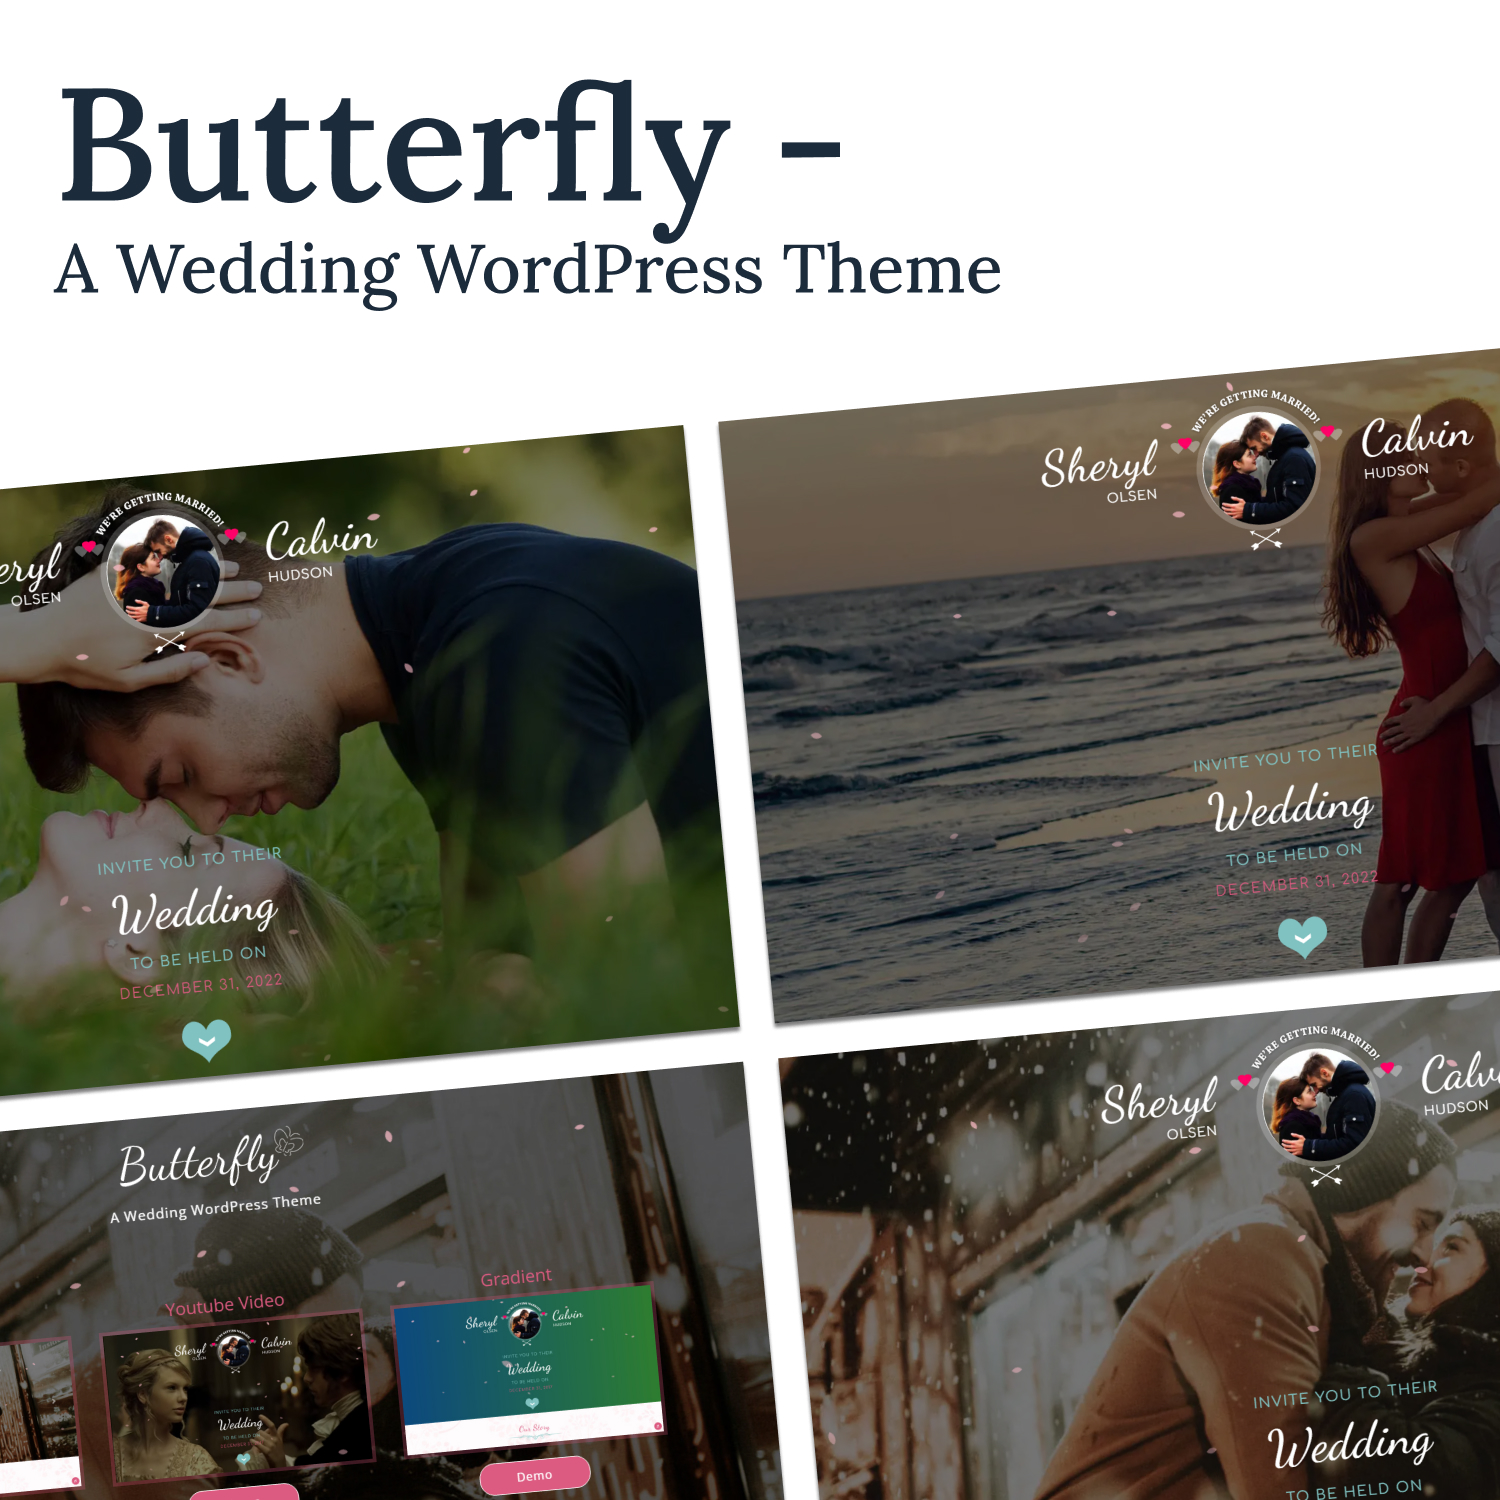 Images with butterfly a wedding wordpress theme.